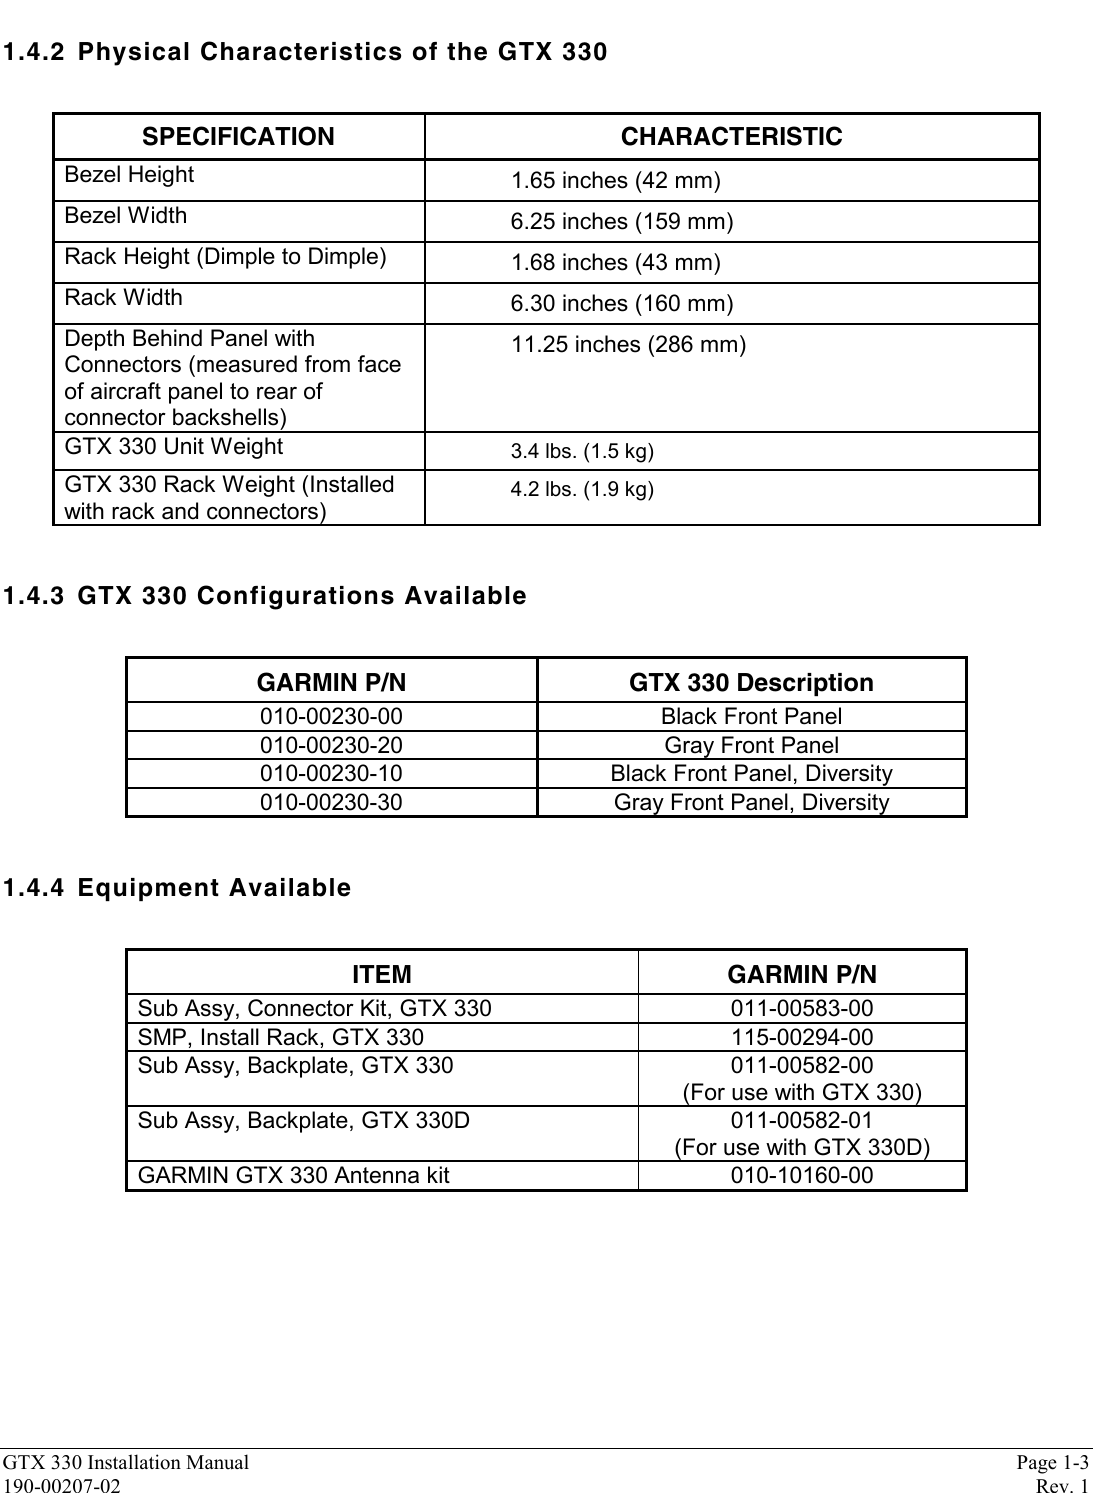 GTX 330 Installation Manual Page 1-3190-00207-02 Rev. 11.4.2 Physical Characteristics of the GTX 330SPECIFICATION CHARACTERISTICBezel Height 1.65 inches (42 mm)Bezel Width 6.25 inches (159 mm)Rack Height (Dimple to Dimple) 1.68 inches (43 mm)Rack Width 6.30 inches (160 mm)Depth Behind Panel withConnectors (measured from faceof aircraft panel to rear ofconnector backshells)11.25 inches (286 mm)GTX 330 Unit Weight 3.4 lbs. (1.5 kg)GTX 330 Rack Weight (Installedwith rack and connectors)4.2 lbs. (1.9 kg)1.4.3 GTX 330 Configurations AvailableGARMIN P/N GTX 330 Description010-00230-00 Black Front Panel010-00230-20 Gray Front Panel010-00230-10 Black Front Panel, Diversity010-00230-30 Gray Front Panel, Diversity1.4.4 Equipment AvailableITEM GARMIN P/NSub Assy, Connector Kit, GTX 330 011-00583-00SMP, Install Rack, GTX 330 115-00294-00Sub Assy, Backplate, GTX 330 011-00582-00(For use with GTX 330)Sub Assy, Backplate, GTX 330D 011-00582-01(For use with GTX 330D)GARMIN GTX 330 Antenna kit 010-10160-00